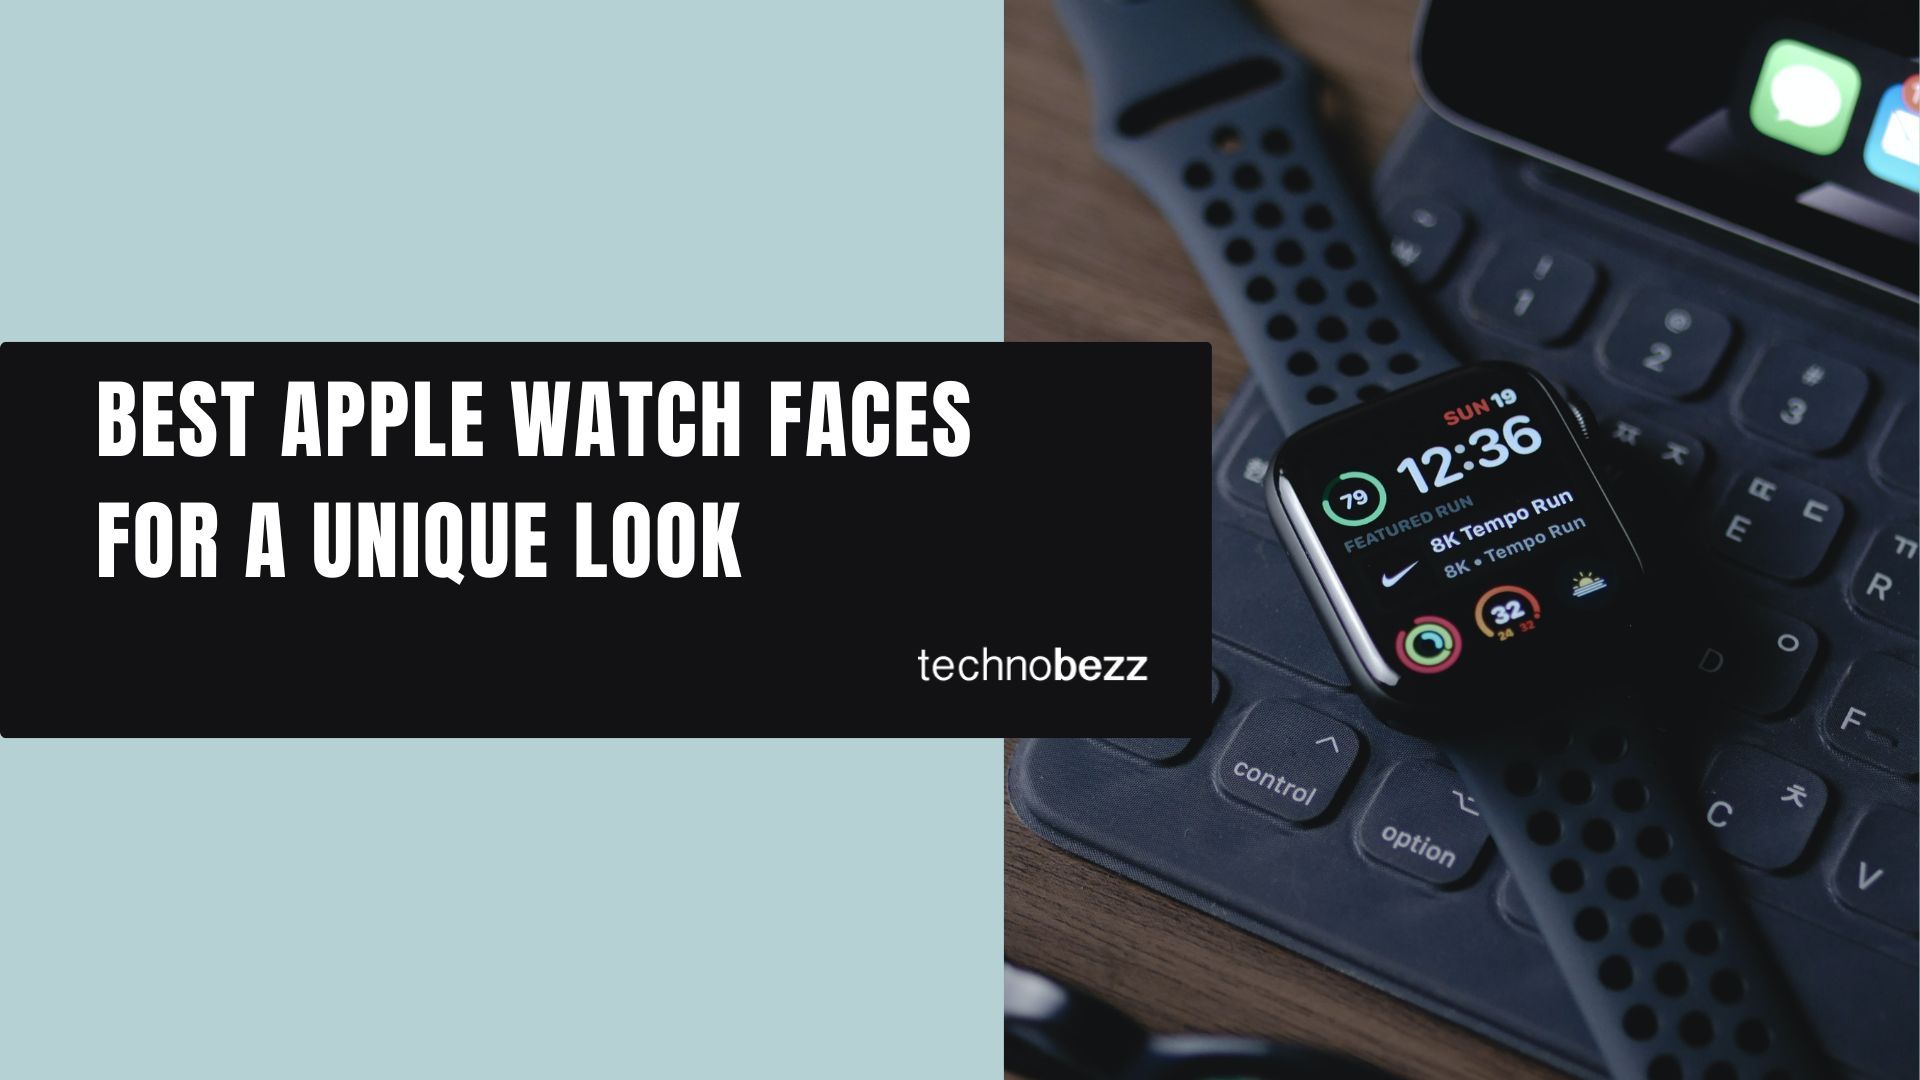 Best Apple Watch Faces for a Unique Look